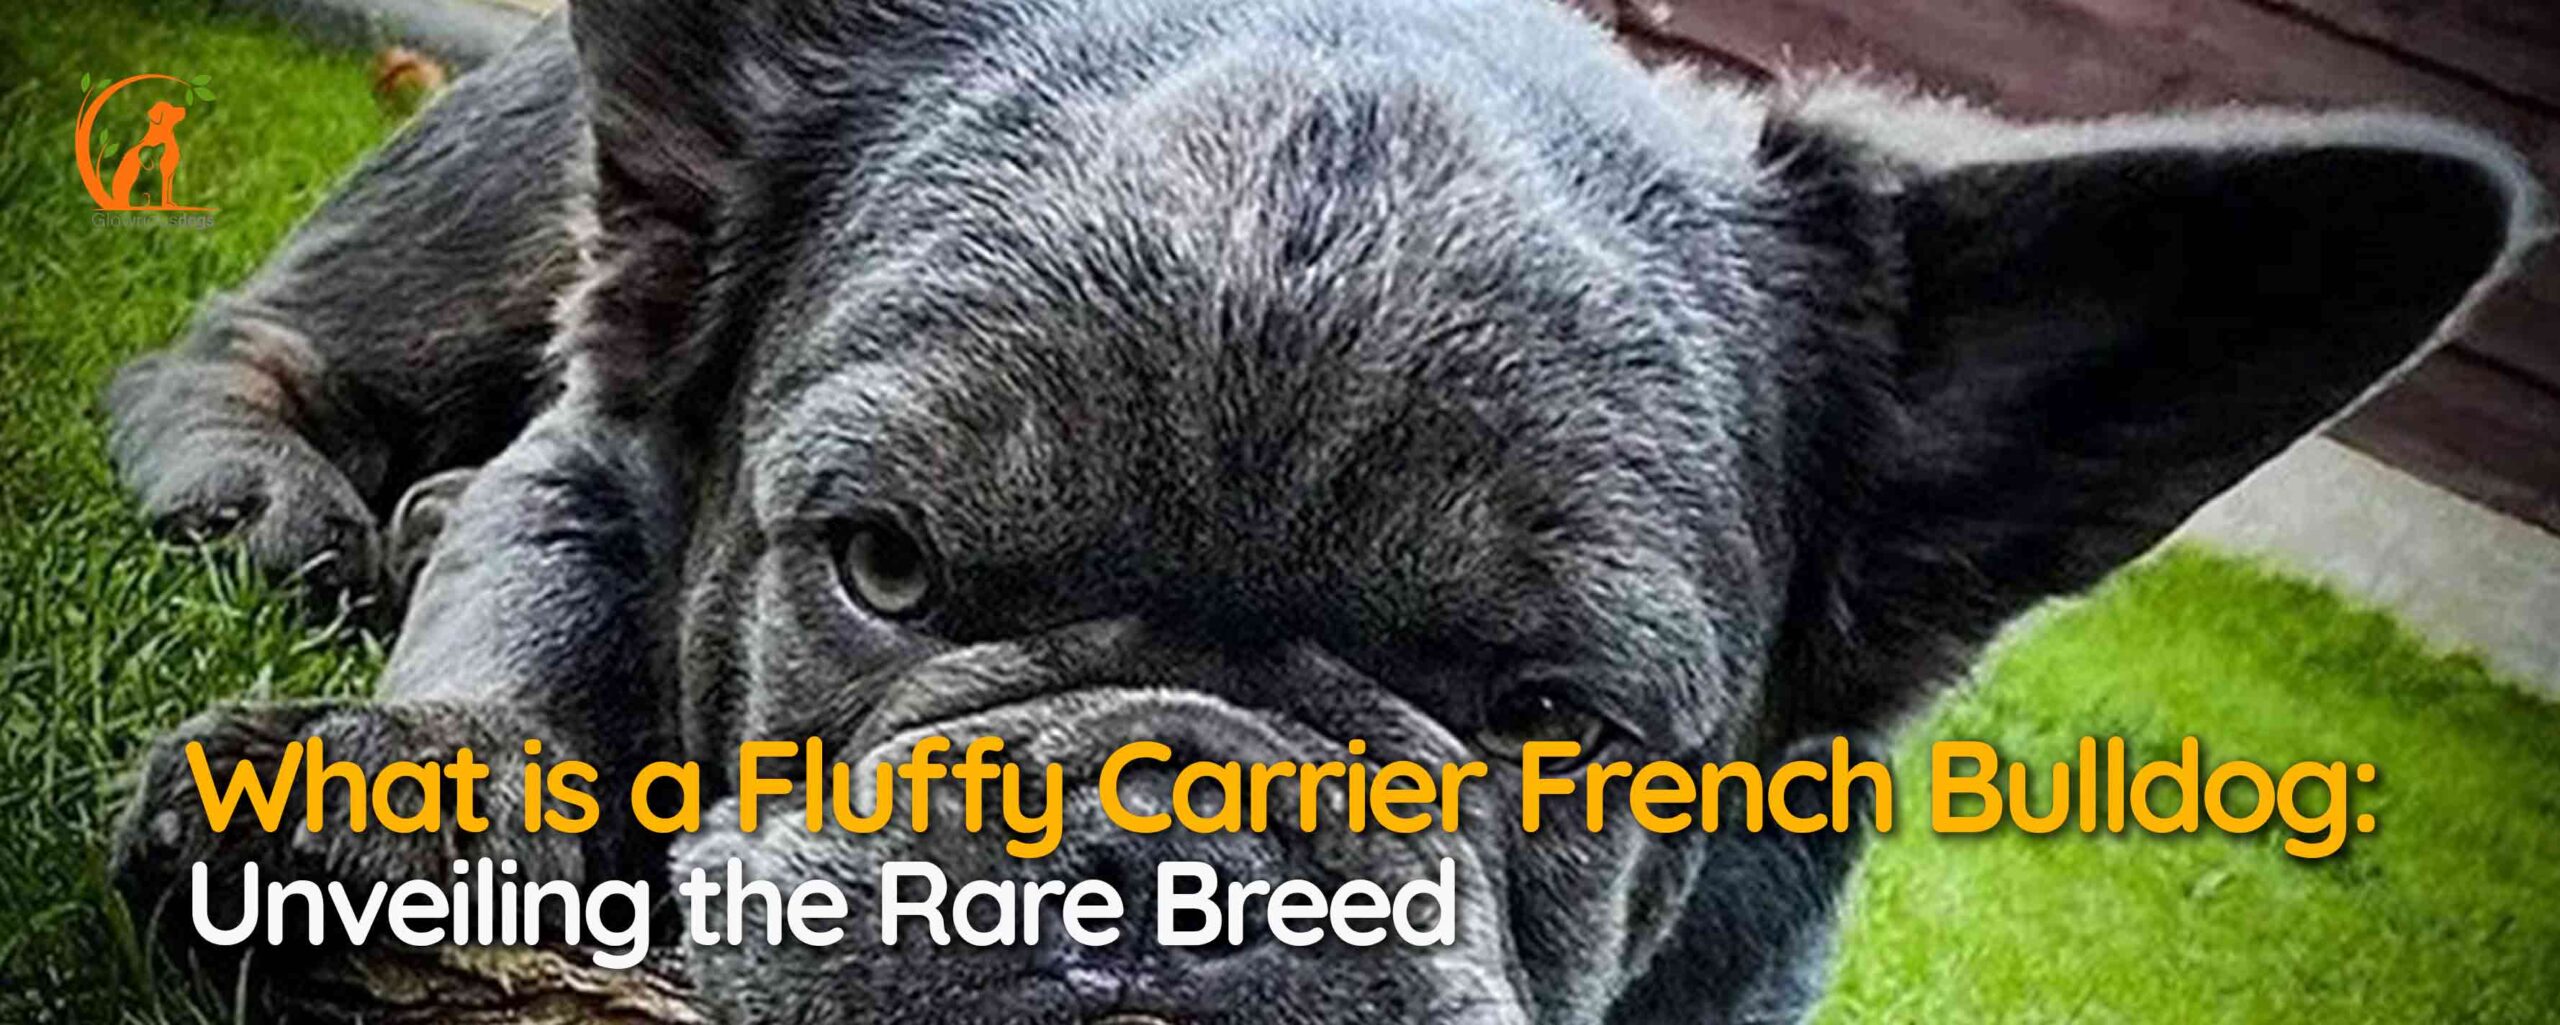 What is a Fluffy Carrier French Bulldog: Unveiling the Rare Breed